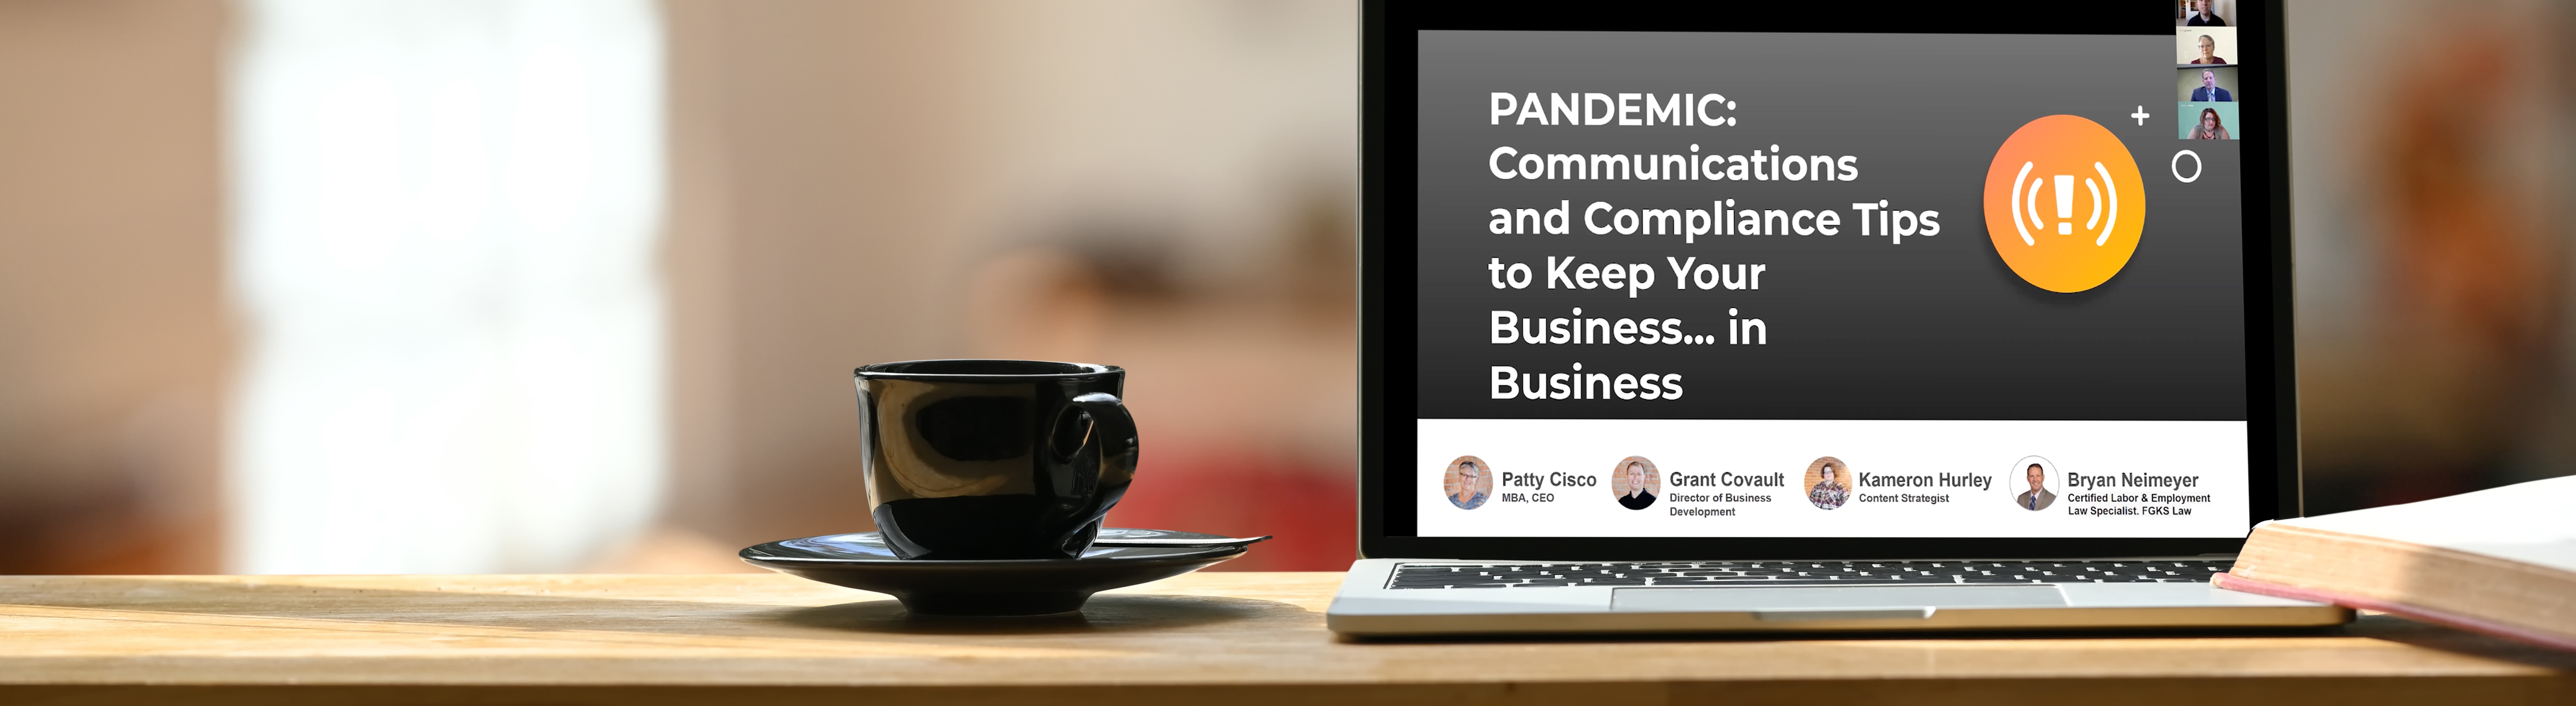 PANDEMIC: Communications and Compliance Tips to Keep Your Business... in Business